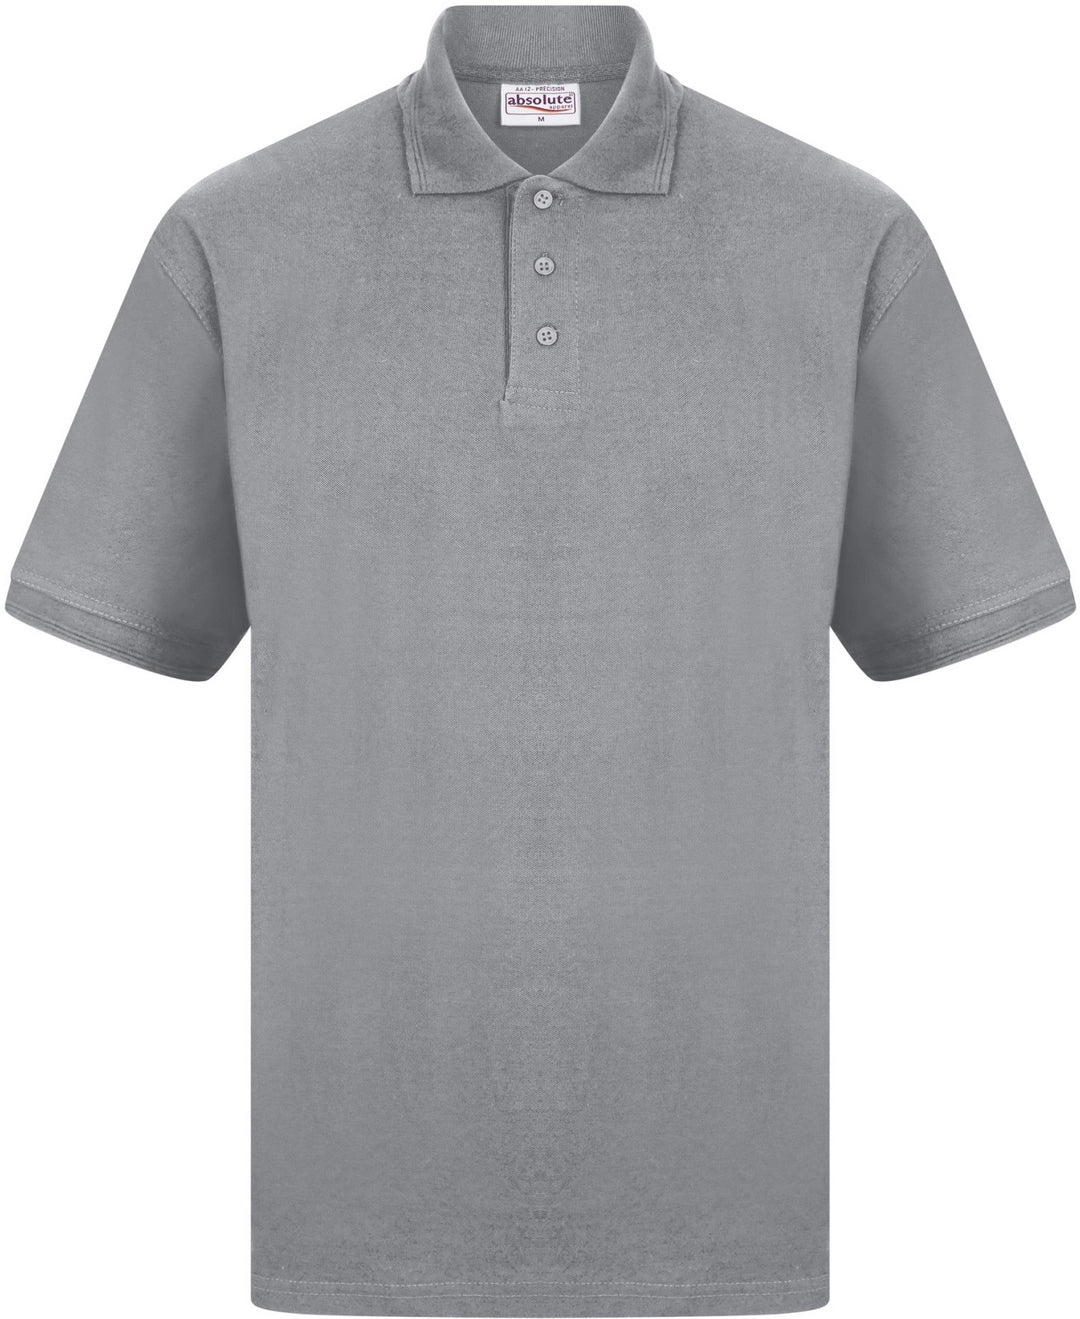 Precision Polycotton Polo Shirt 240gsm Adult Other color - COOZO